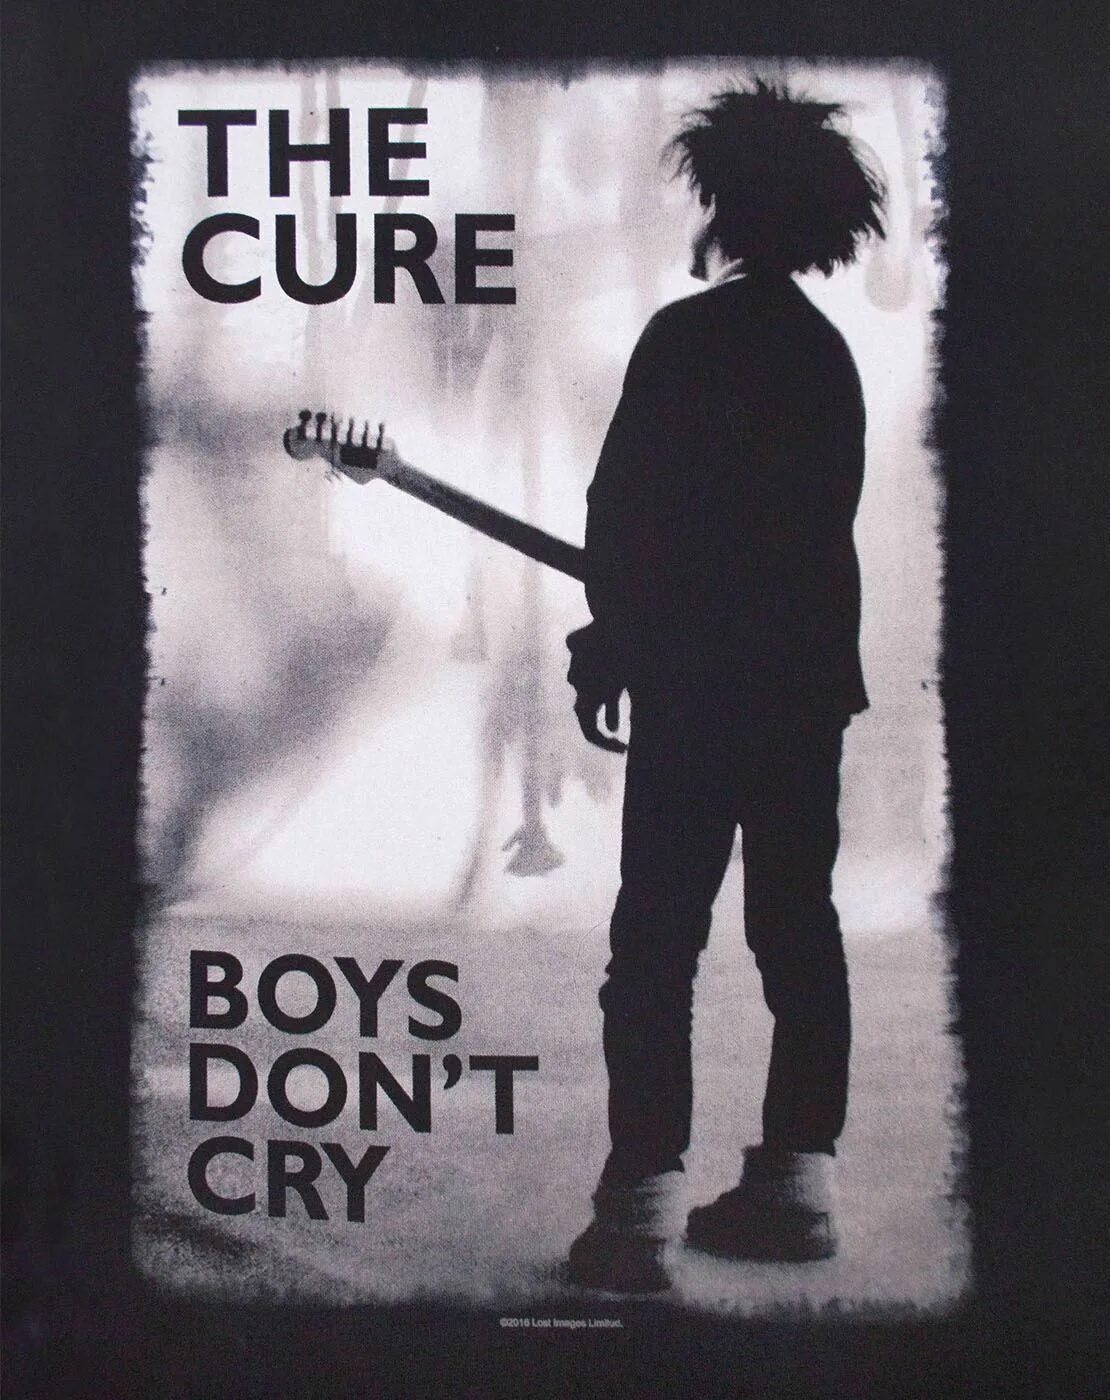 Boys dont. The Cure boys don't Cry. Boys don't Cry the Cure альбом. The Cure boys don't Cry 1980. Футболка boys don't Cry.